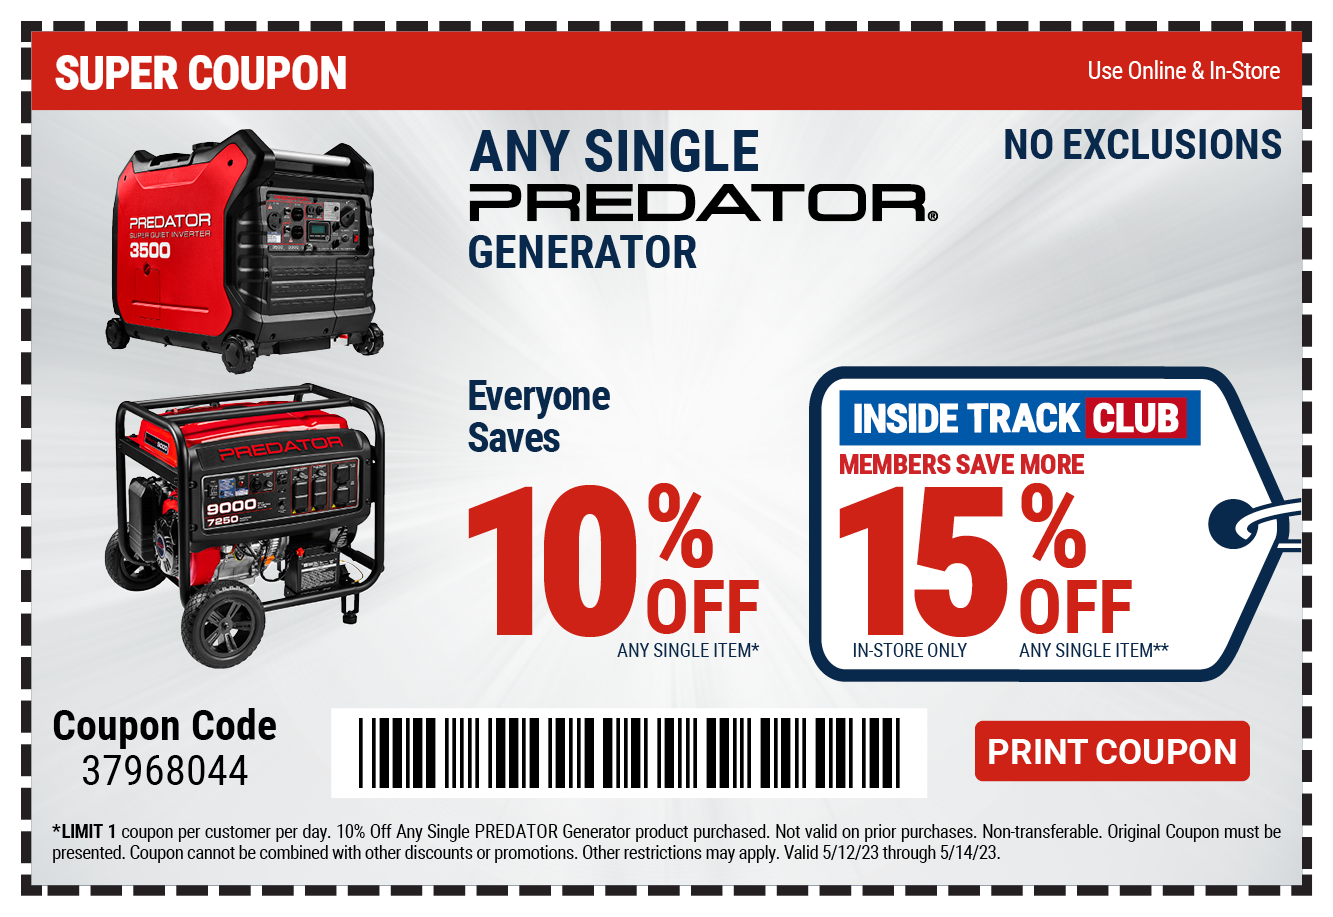 Harbor Freight Tools Coupon Database Free coupons, percent off